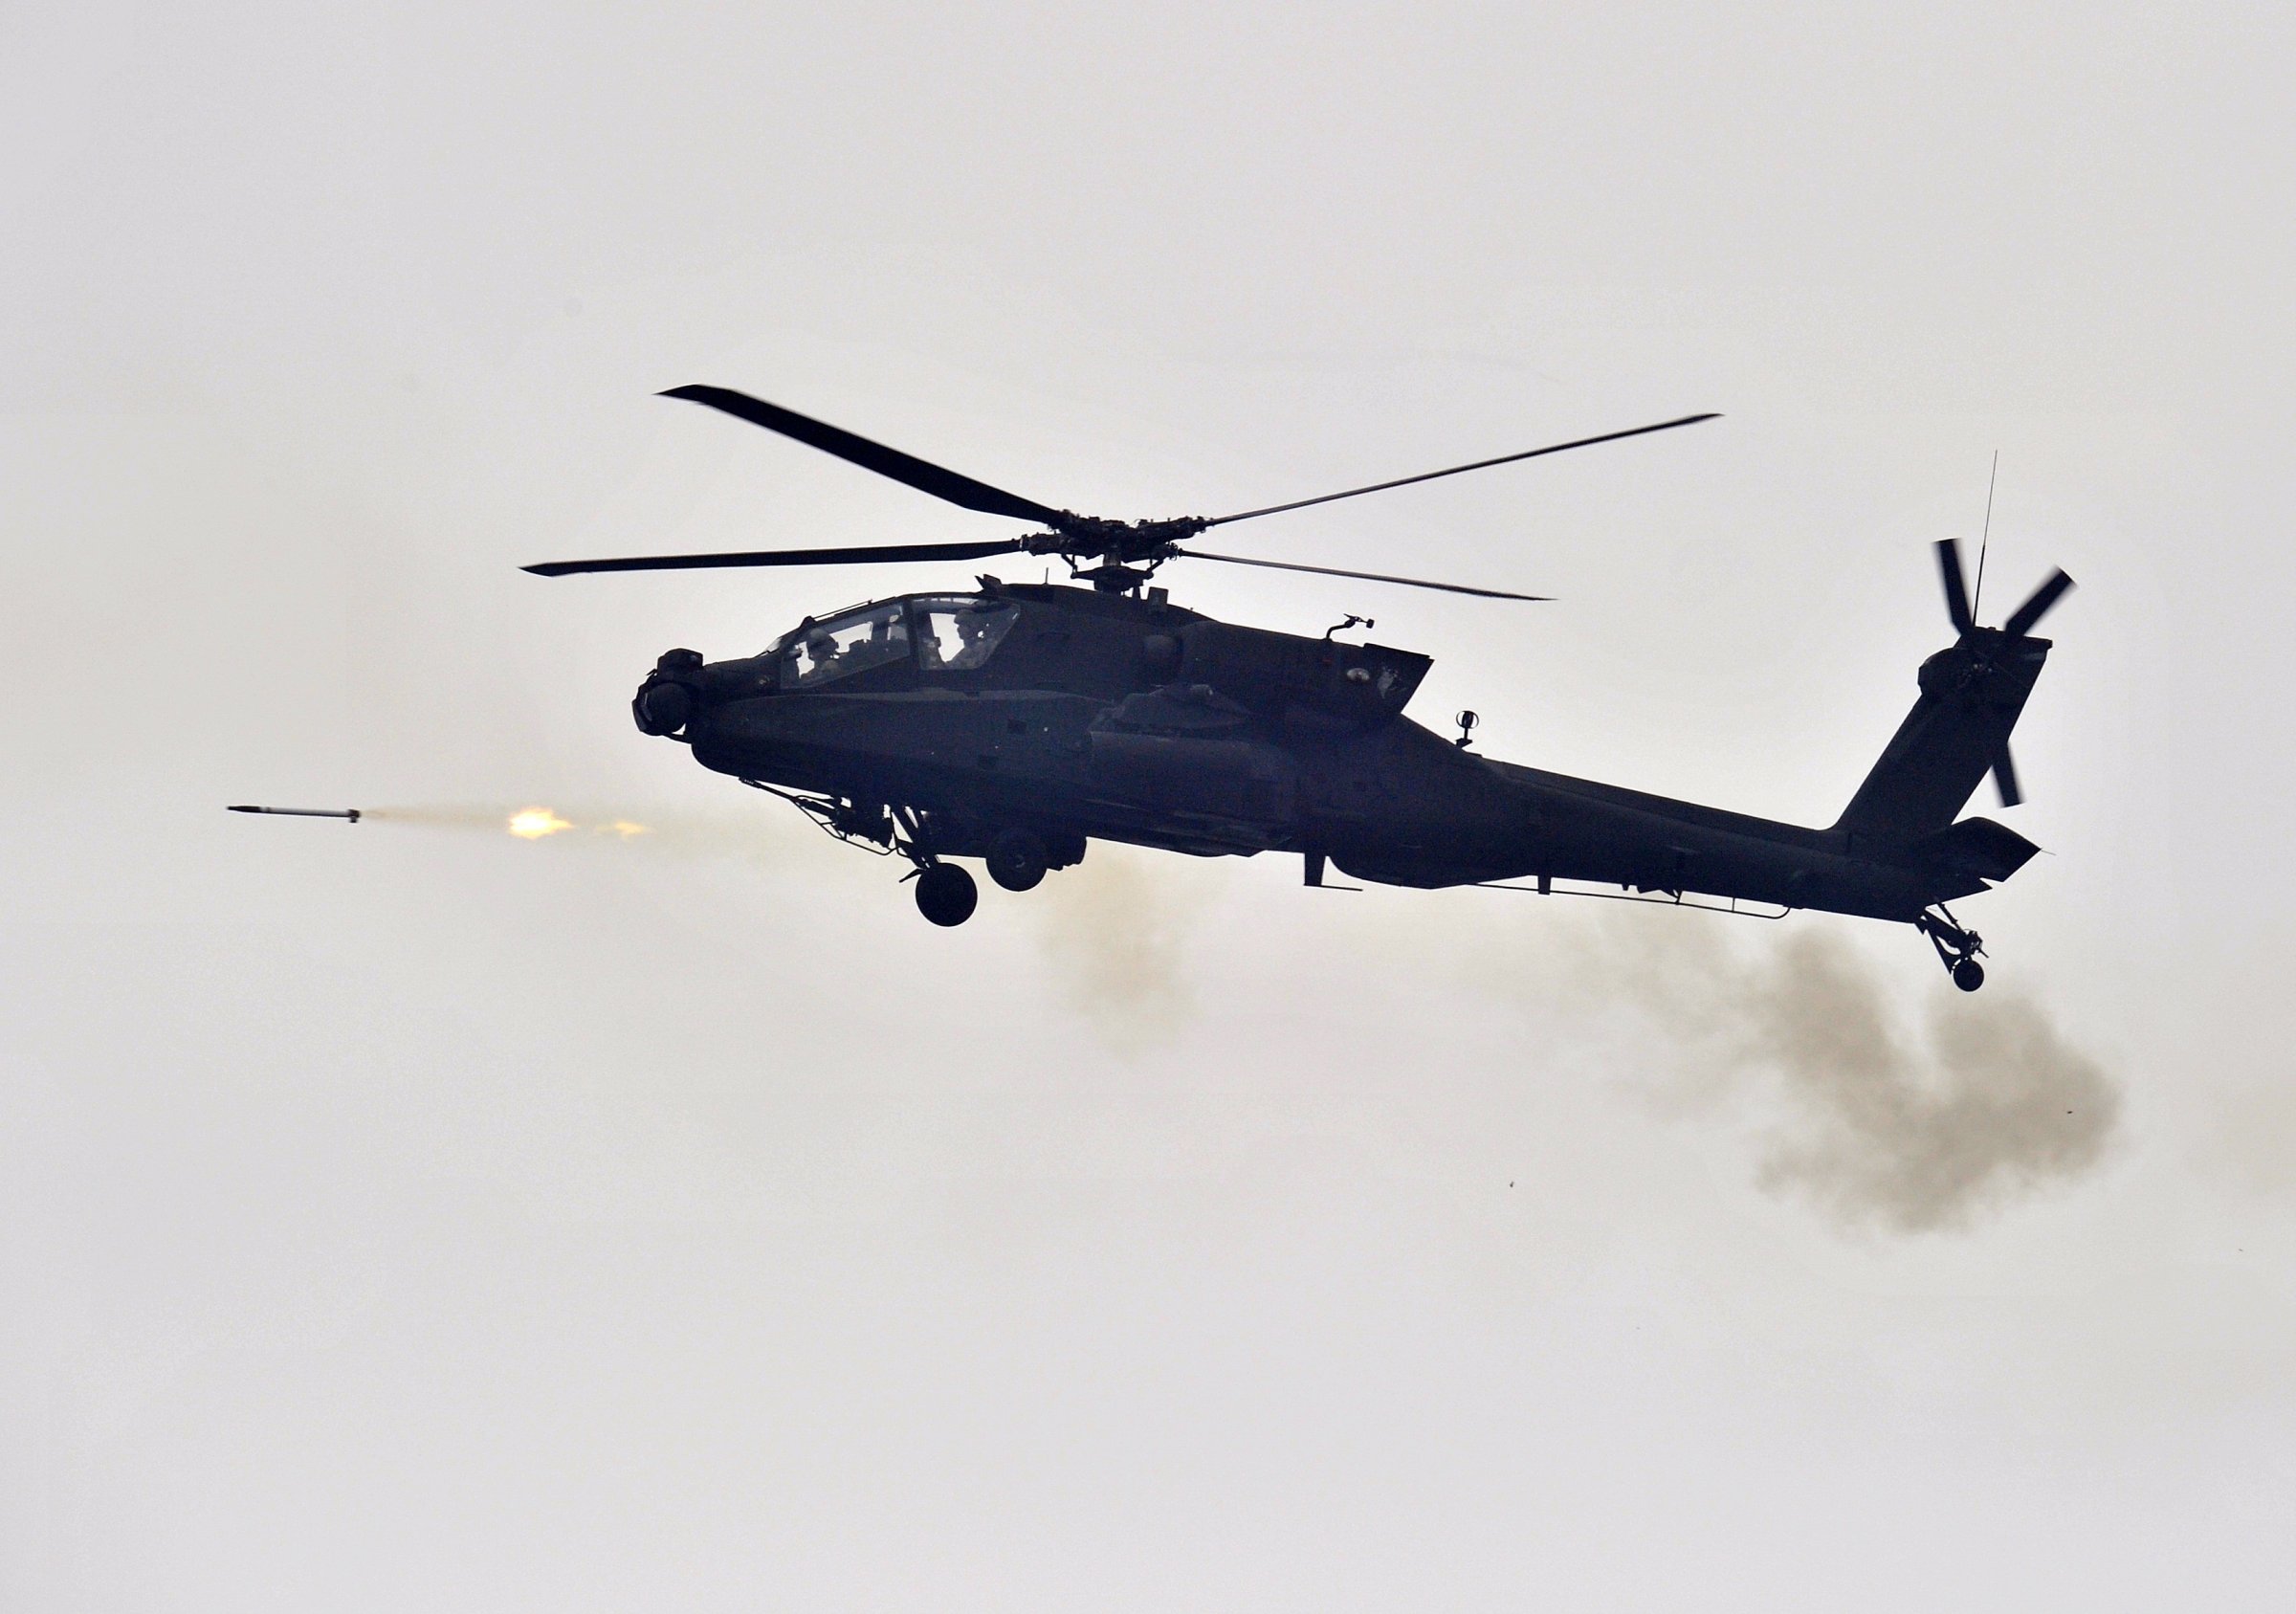 A US AH-64 Apache helicopter fires rocke